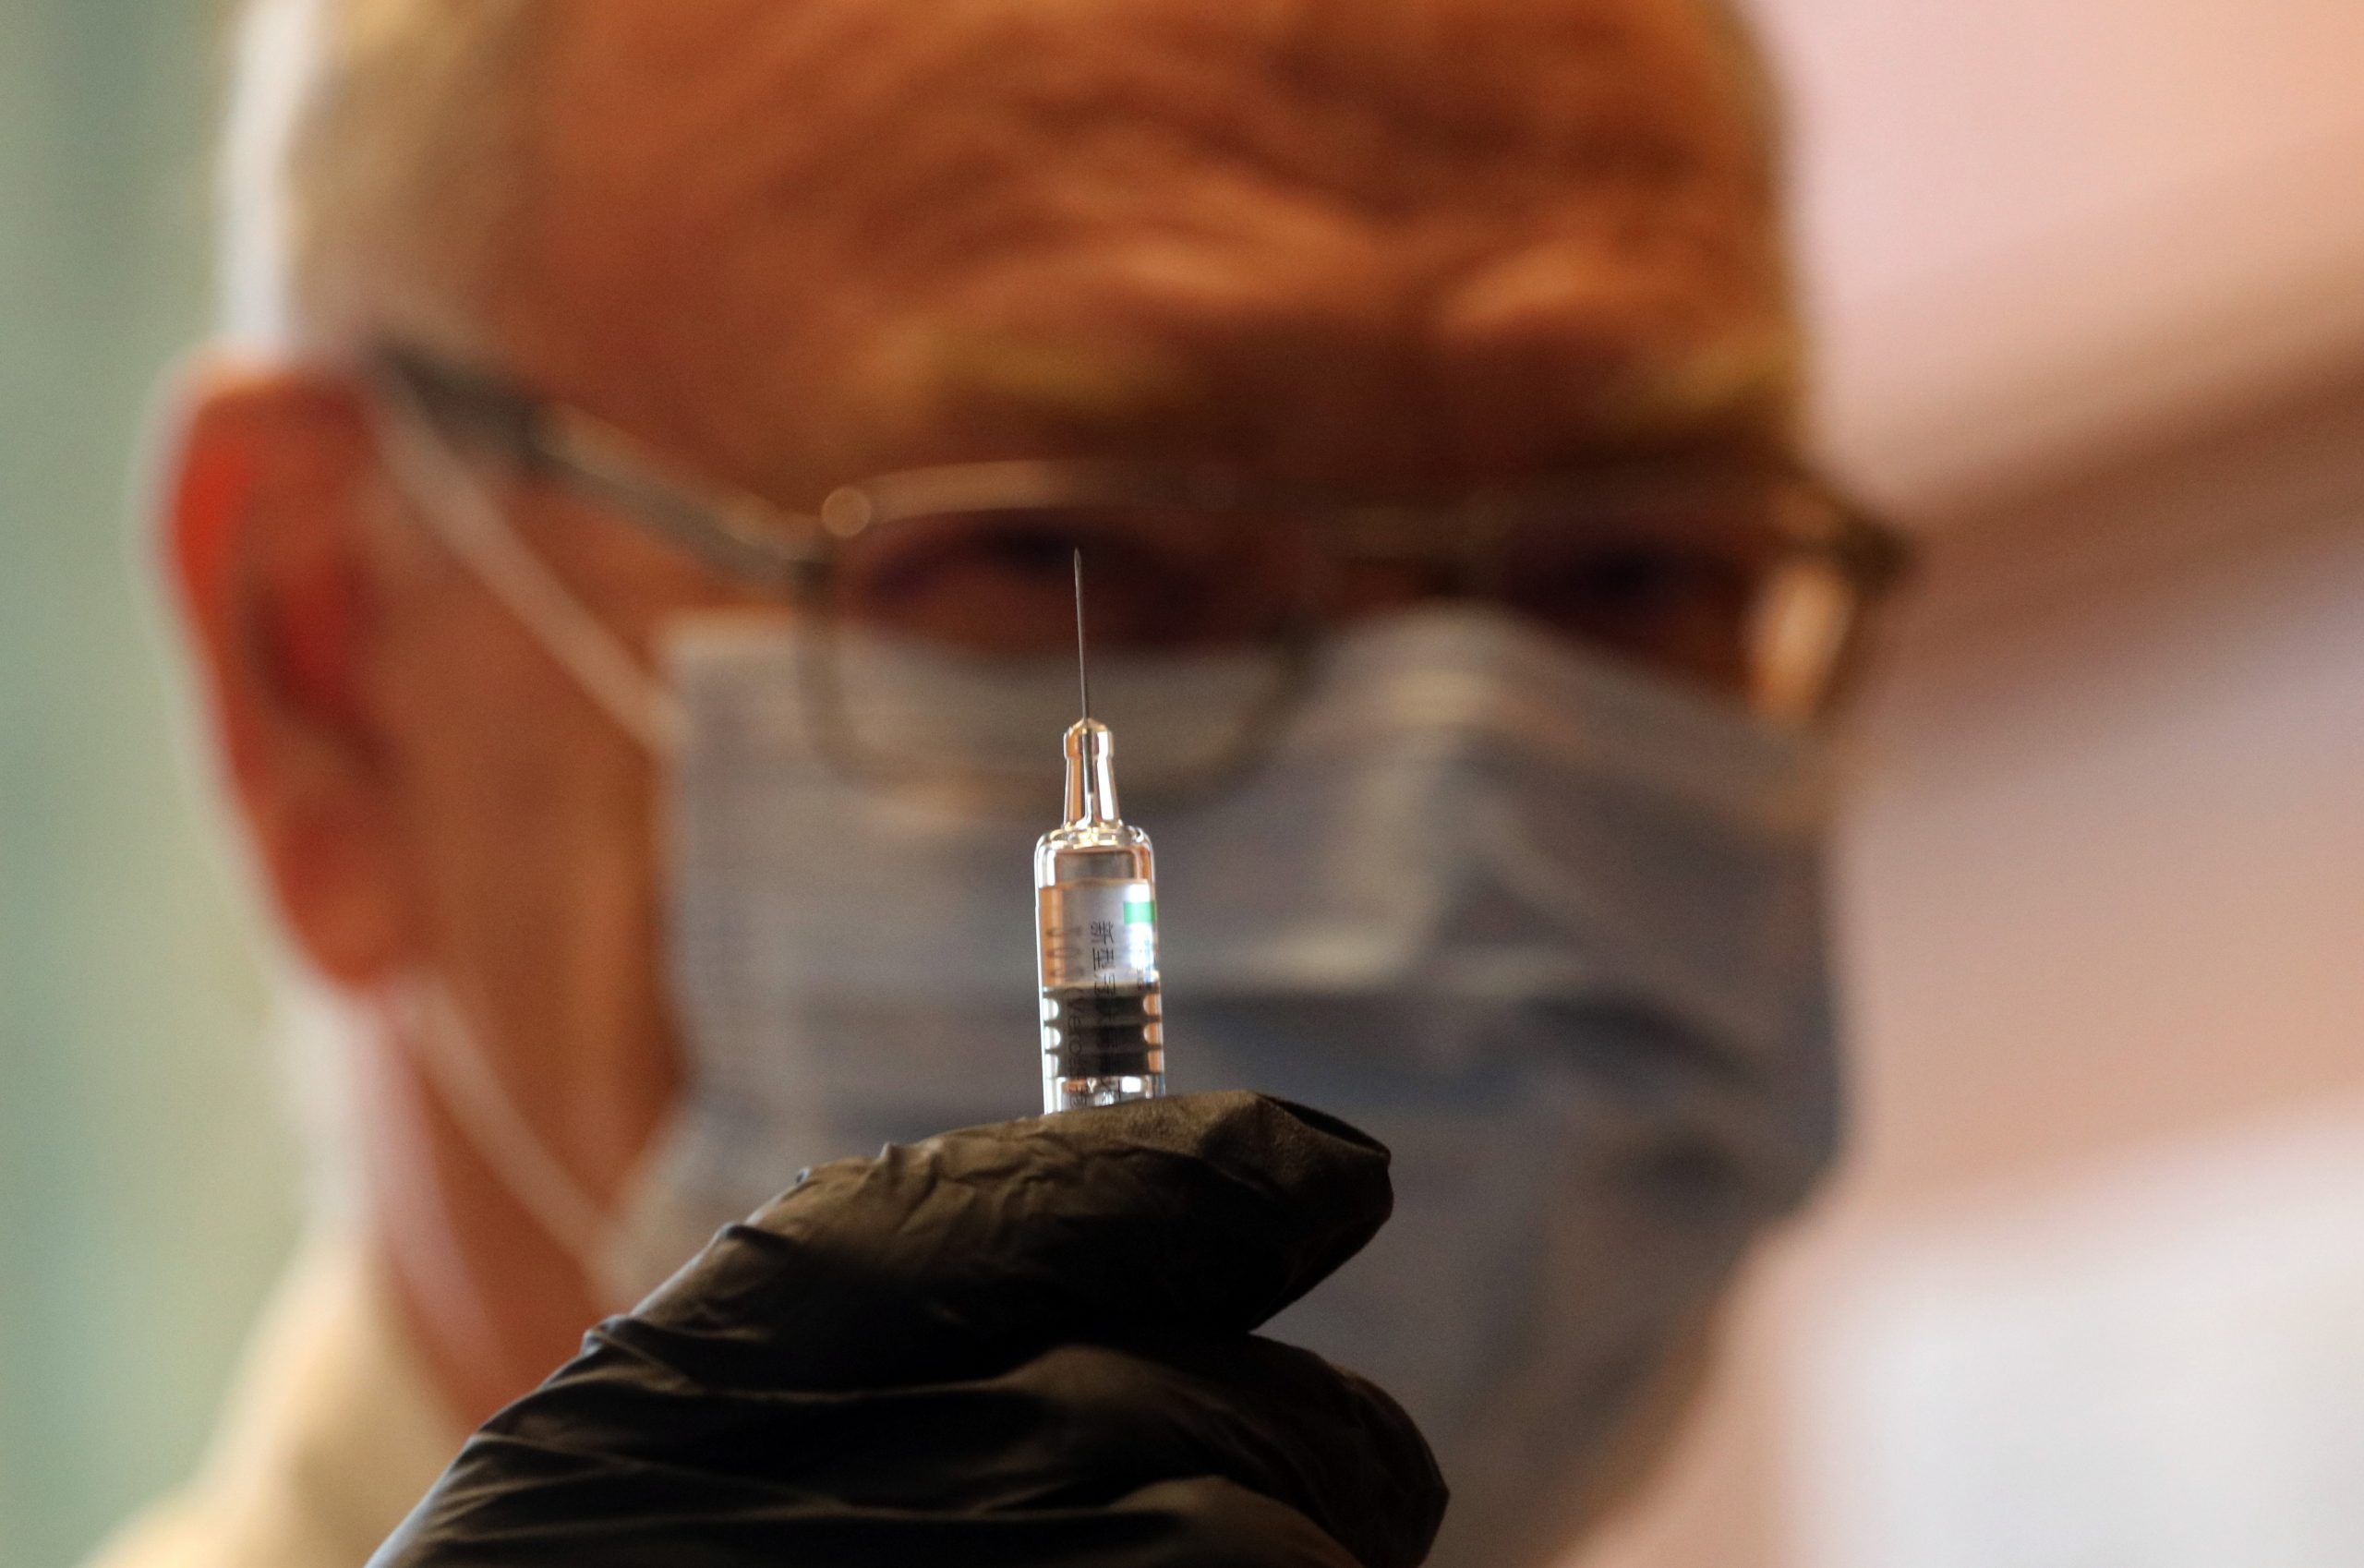 Compulsory Vaccination Unpopular Even with Employers